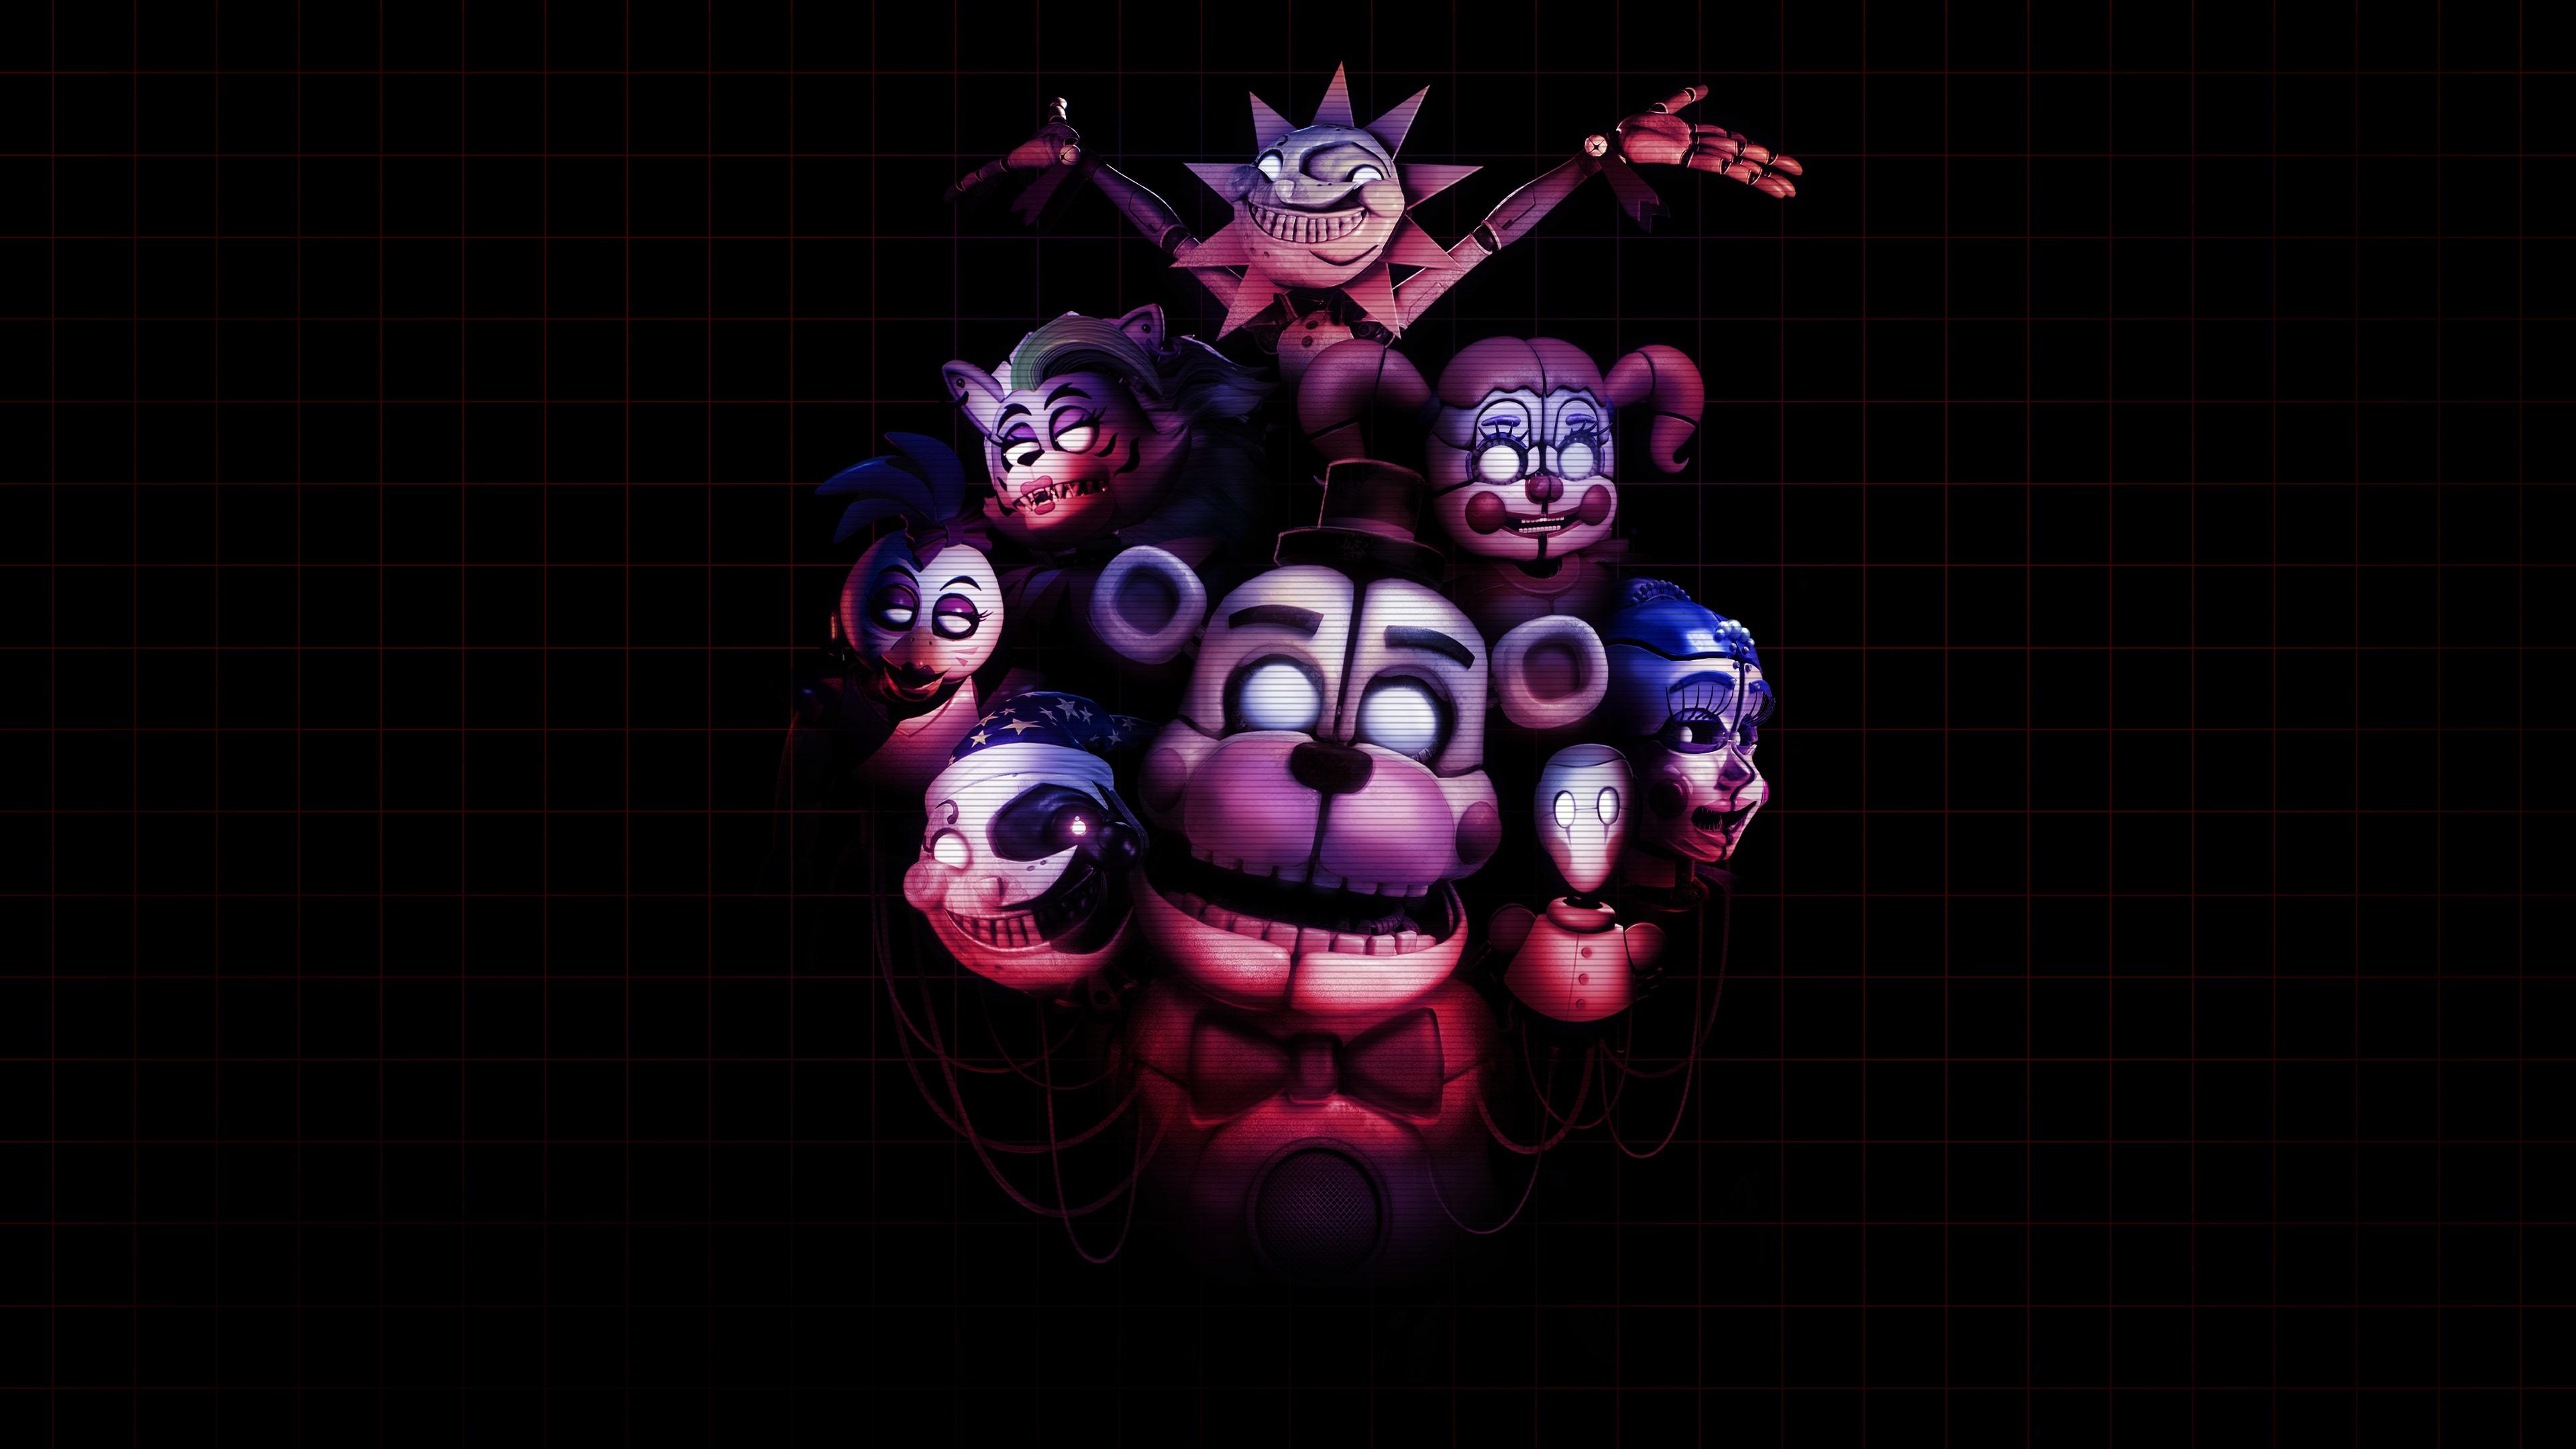 Five Nights at Freddy's::Appstore for Android